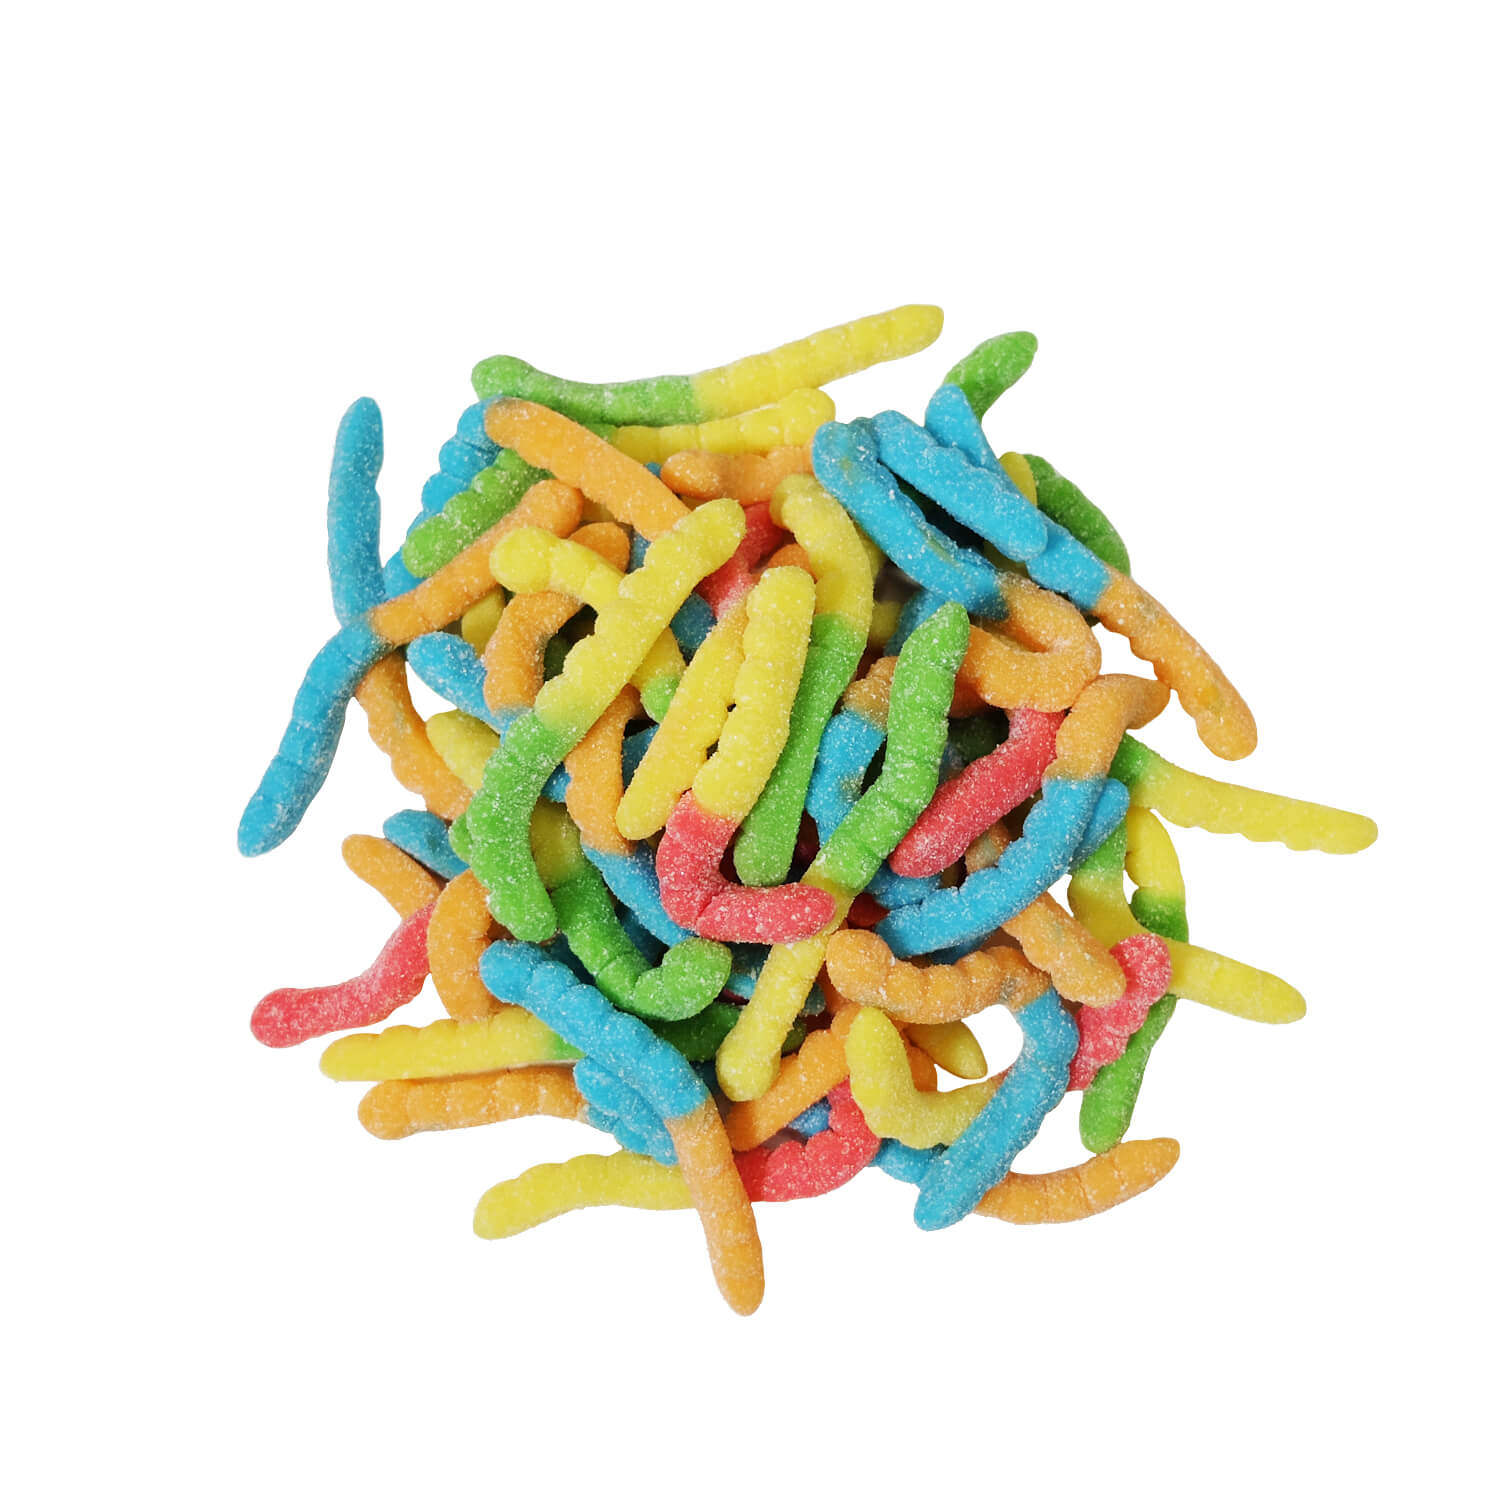 Neon sour Worms